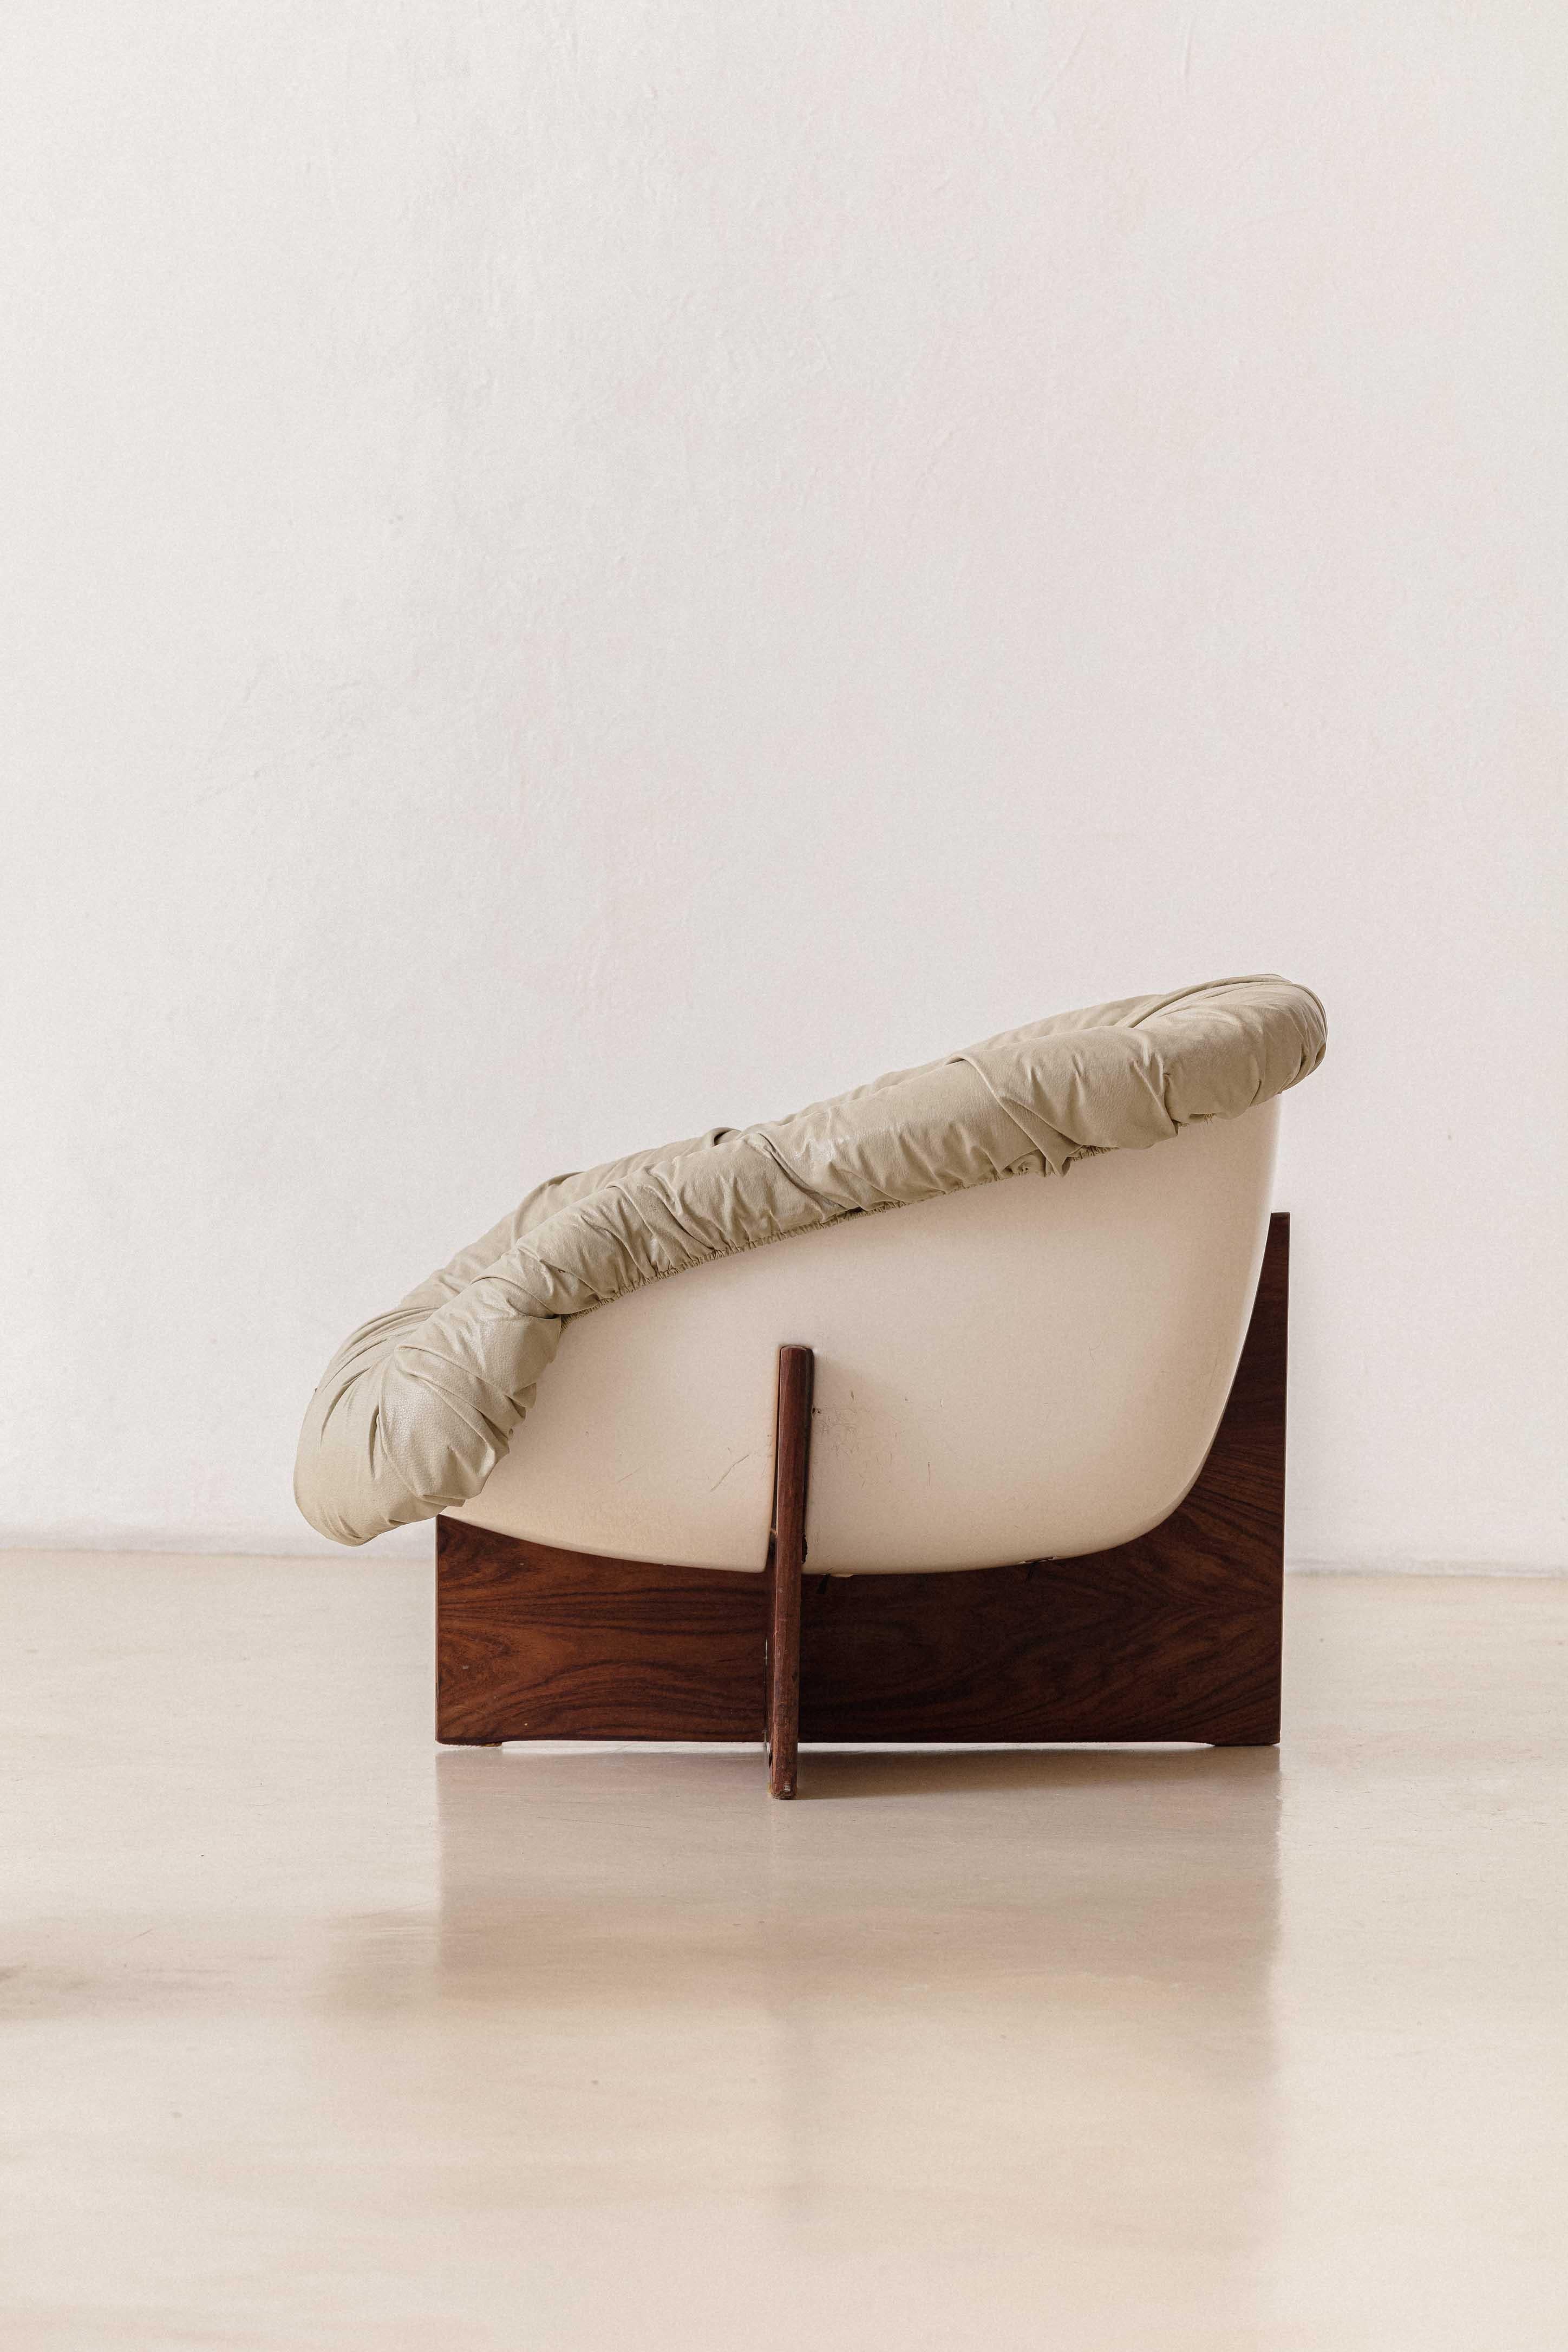 Leather Armchair MP-61 in Brazilian Rosewood by Percival Lafer, Móveis Lafer, 1973